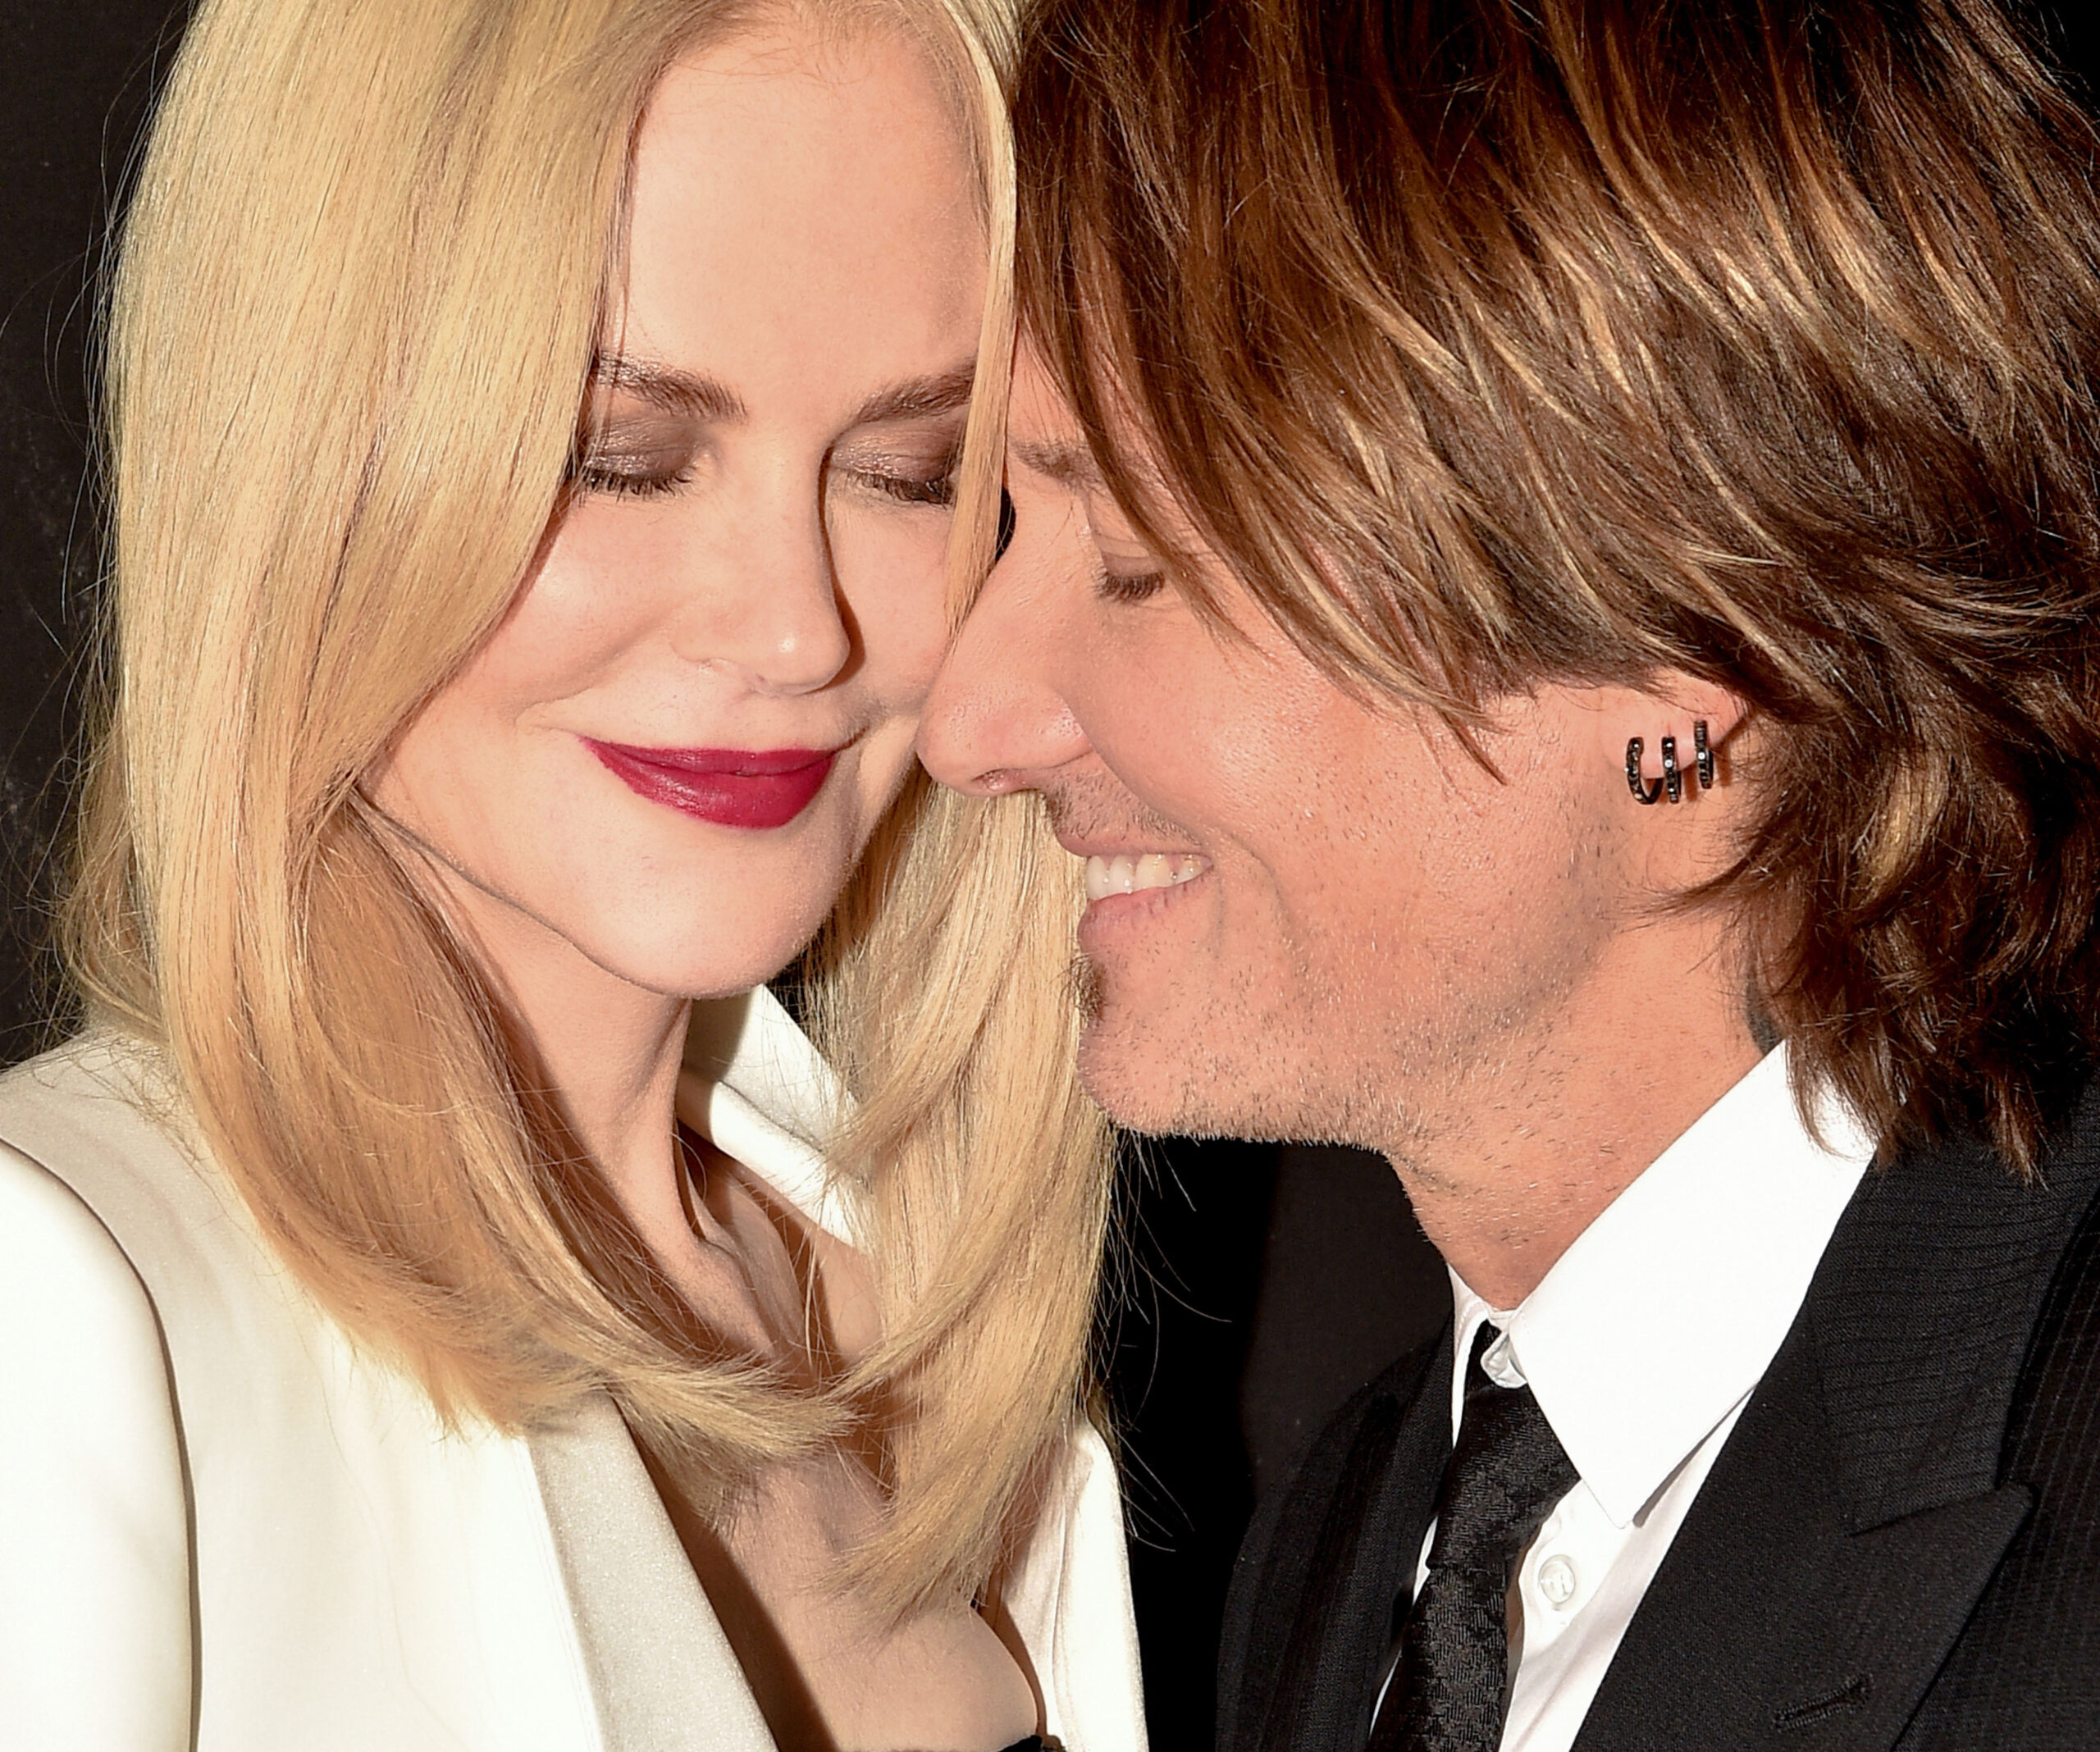 Nicole Kidman and Keith Urban’s intimate kiss on the red carpet restores our faith in true love!